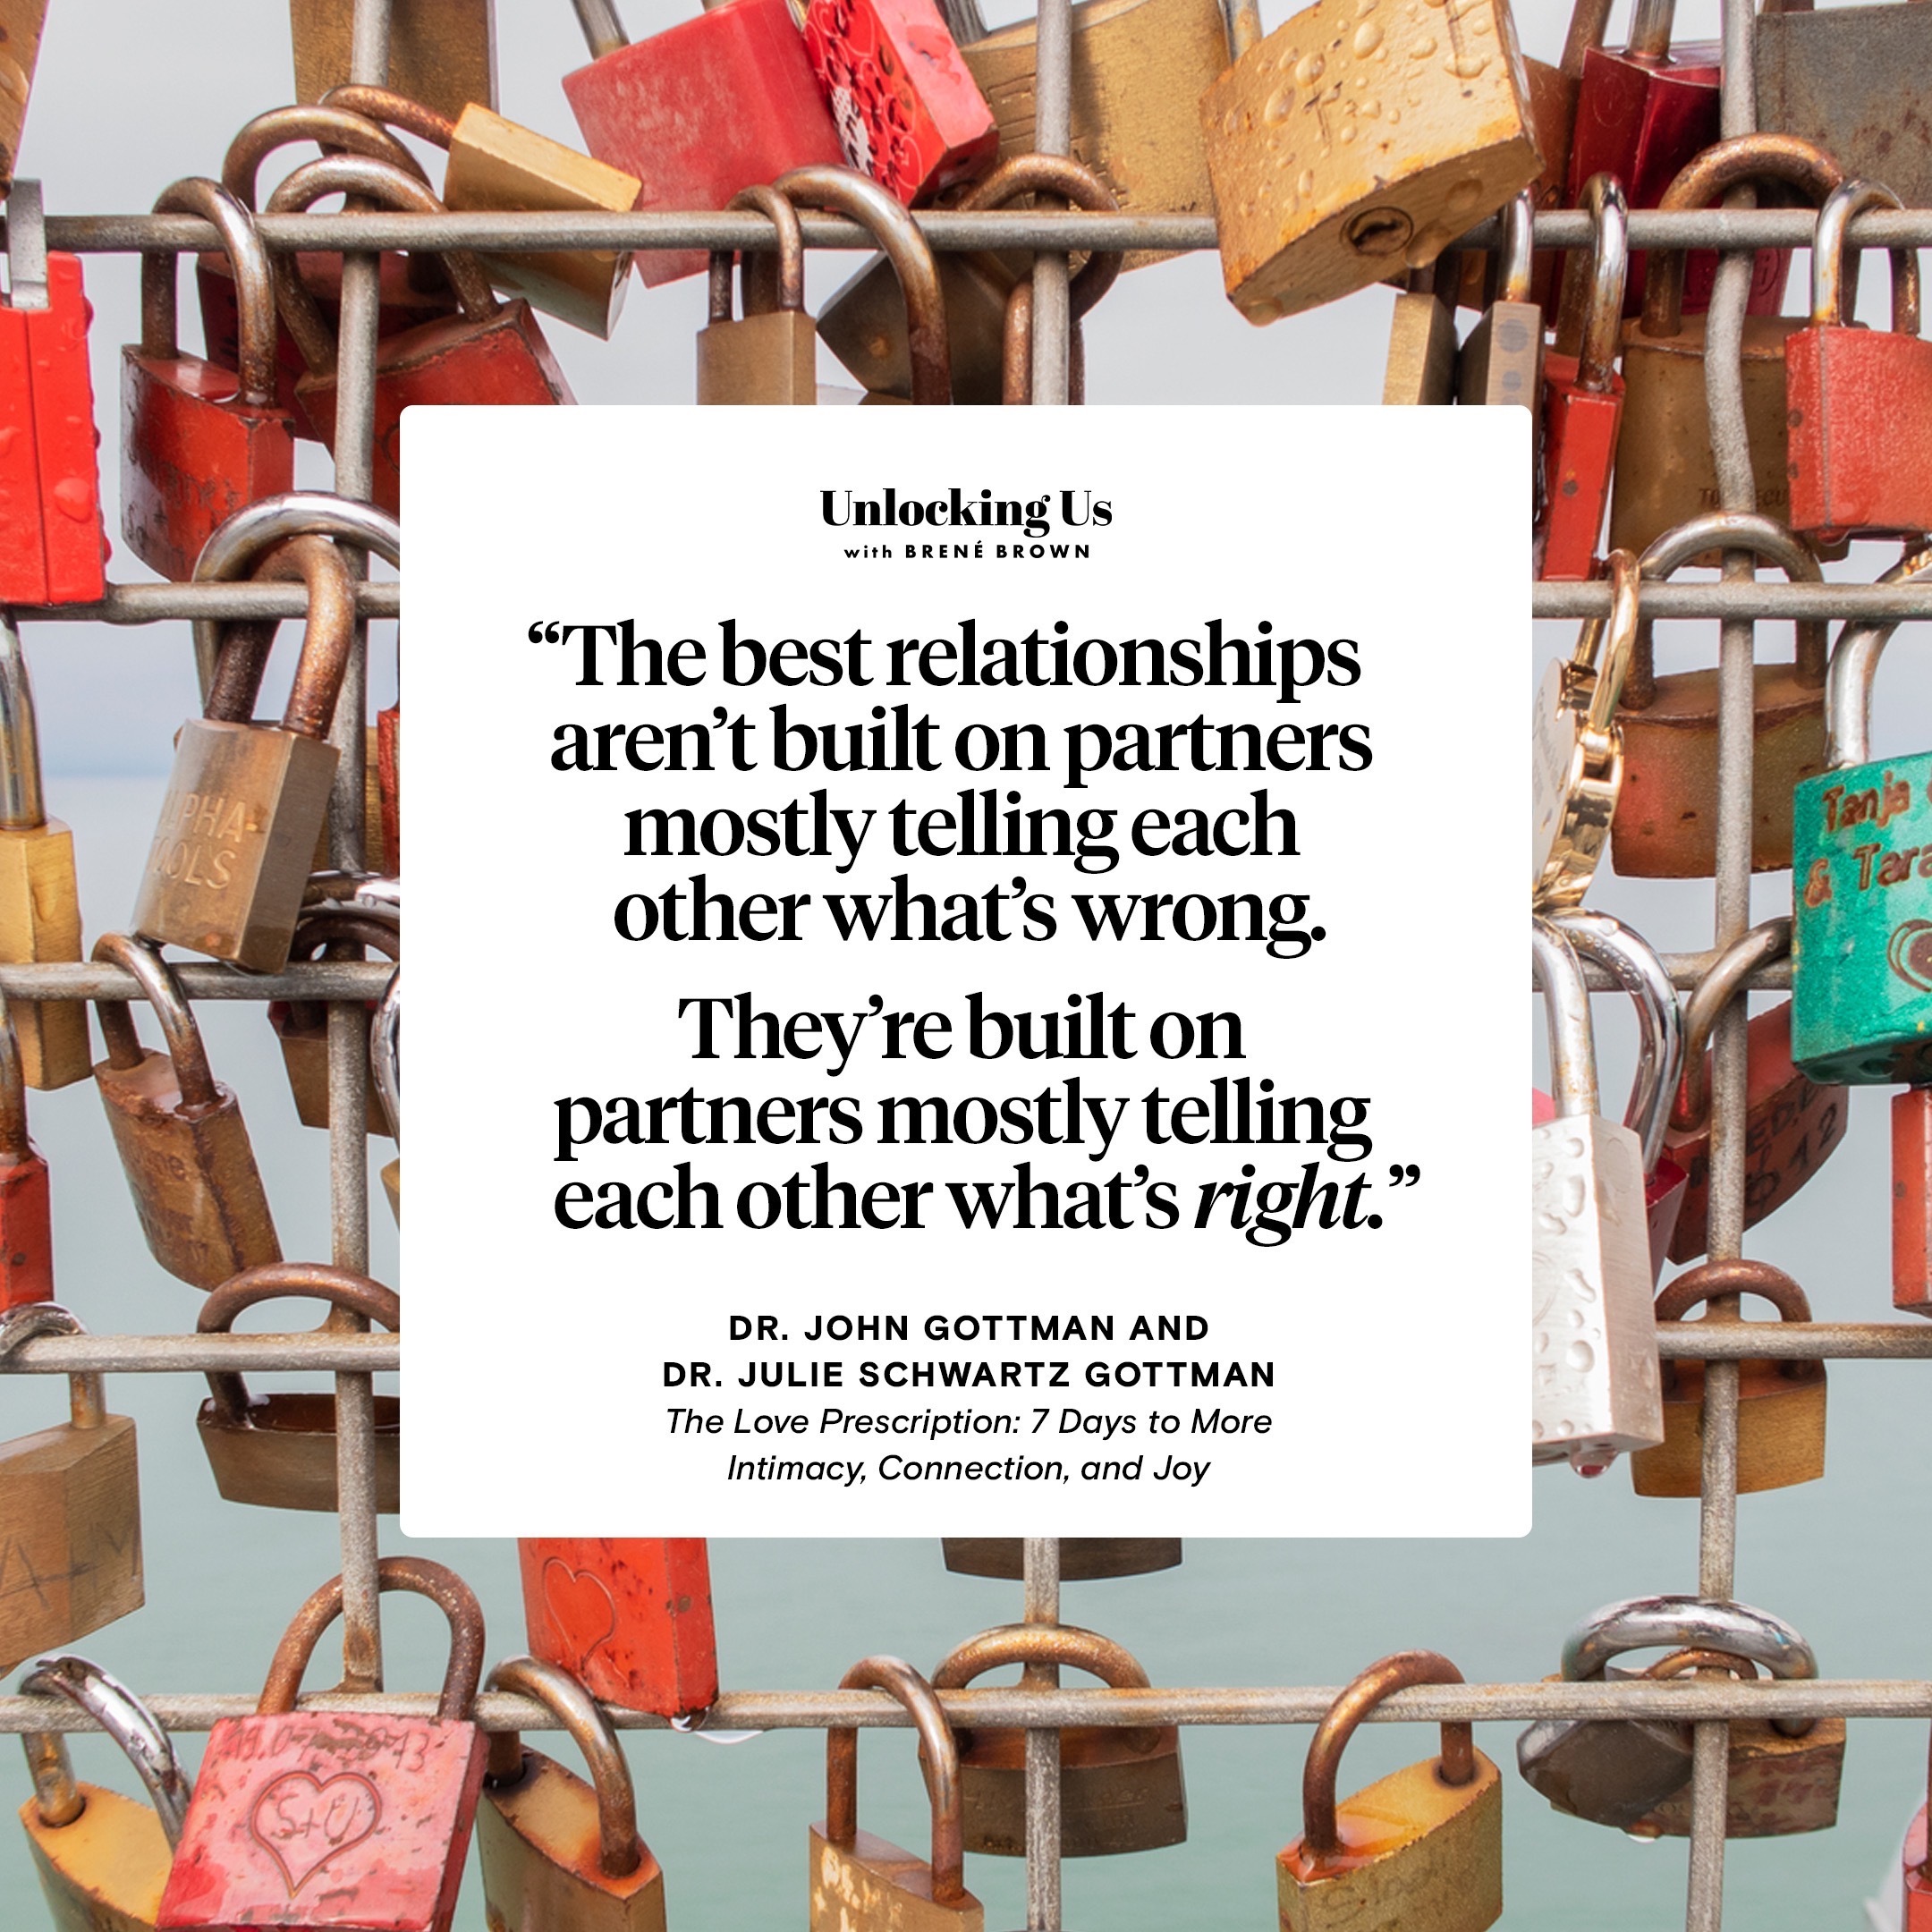 A quote from The Love Prescription: Seven Days to More Intimacy, Connection, and Joy, by Drs. John and Julie Gottman: The best relationships aren’t built on partners mostly telling each other what’s wrong. They’re built on partners most telling each other what’s right.